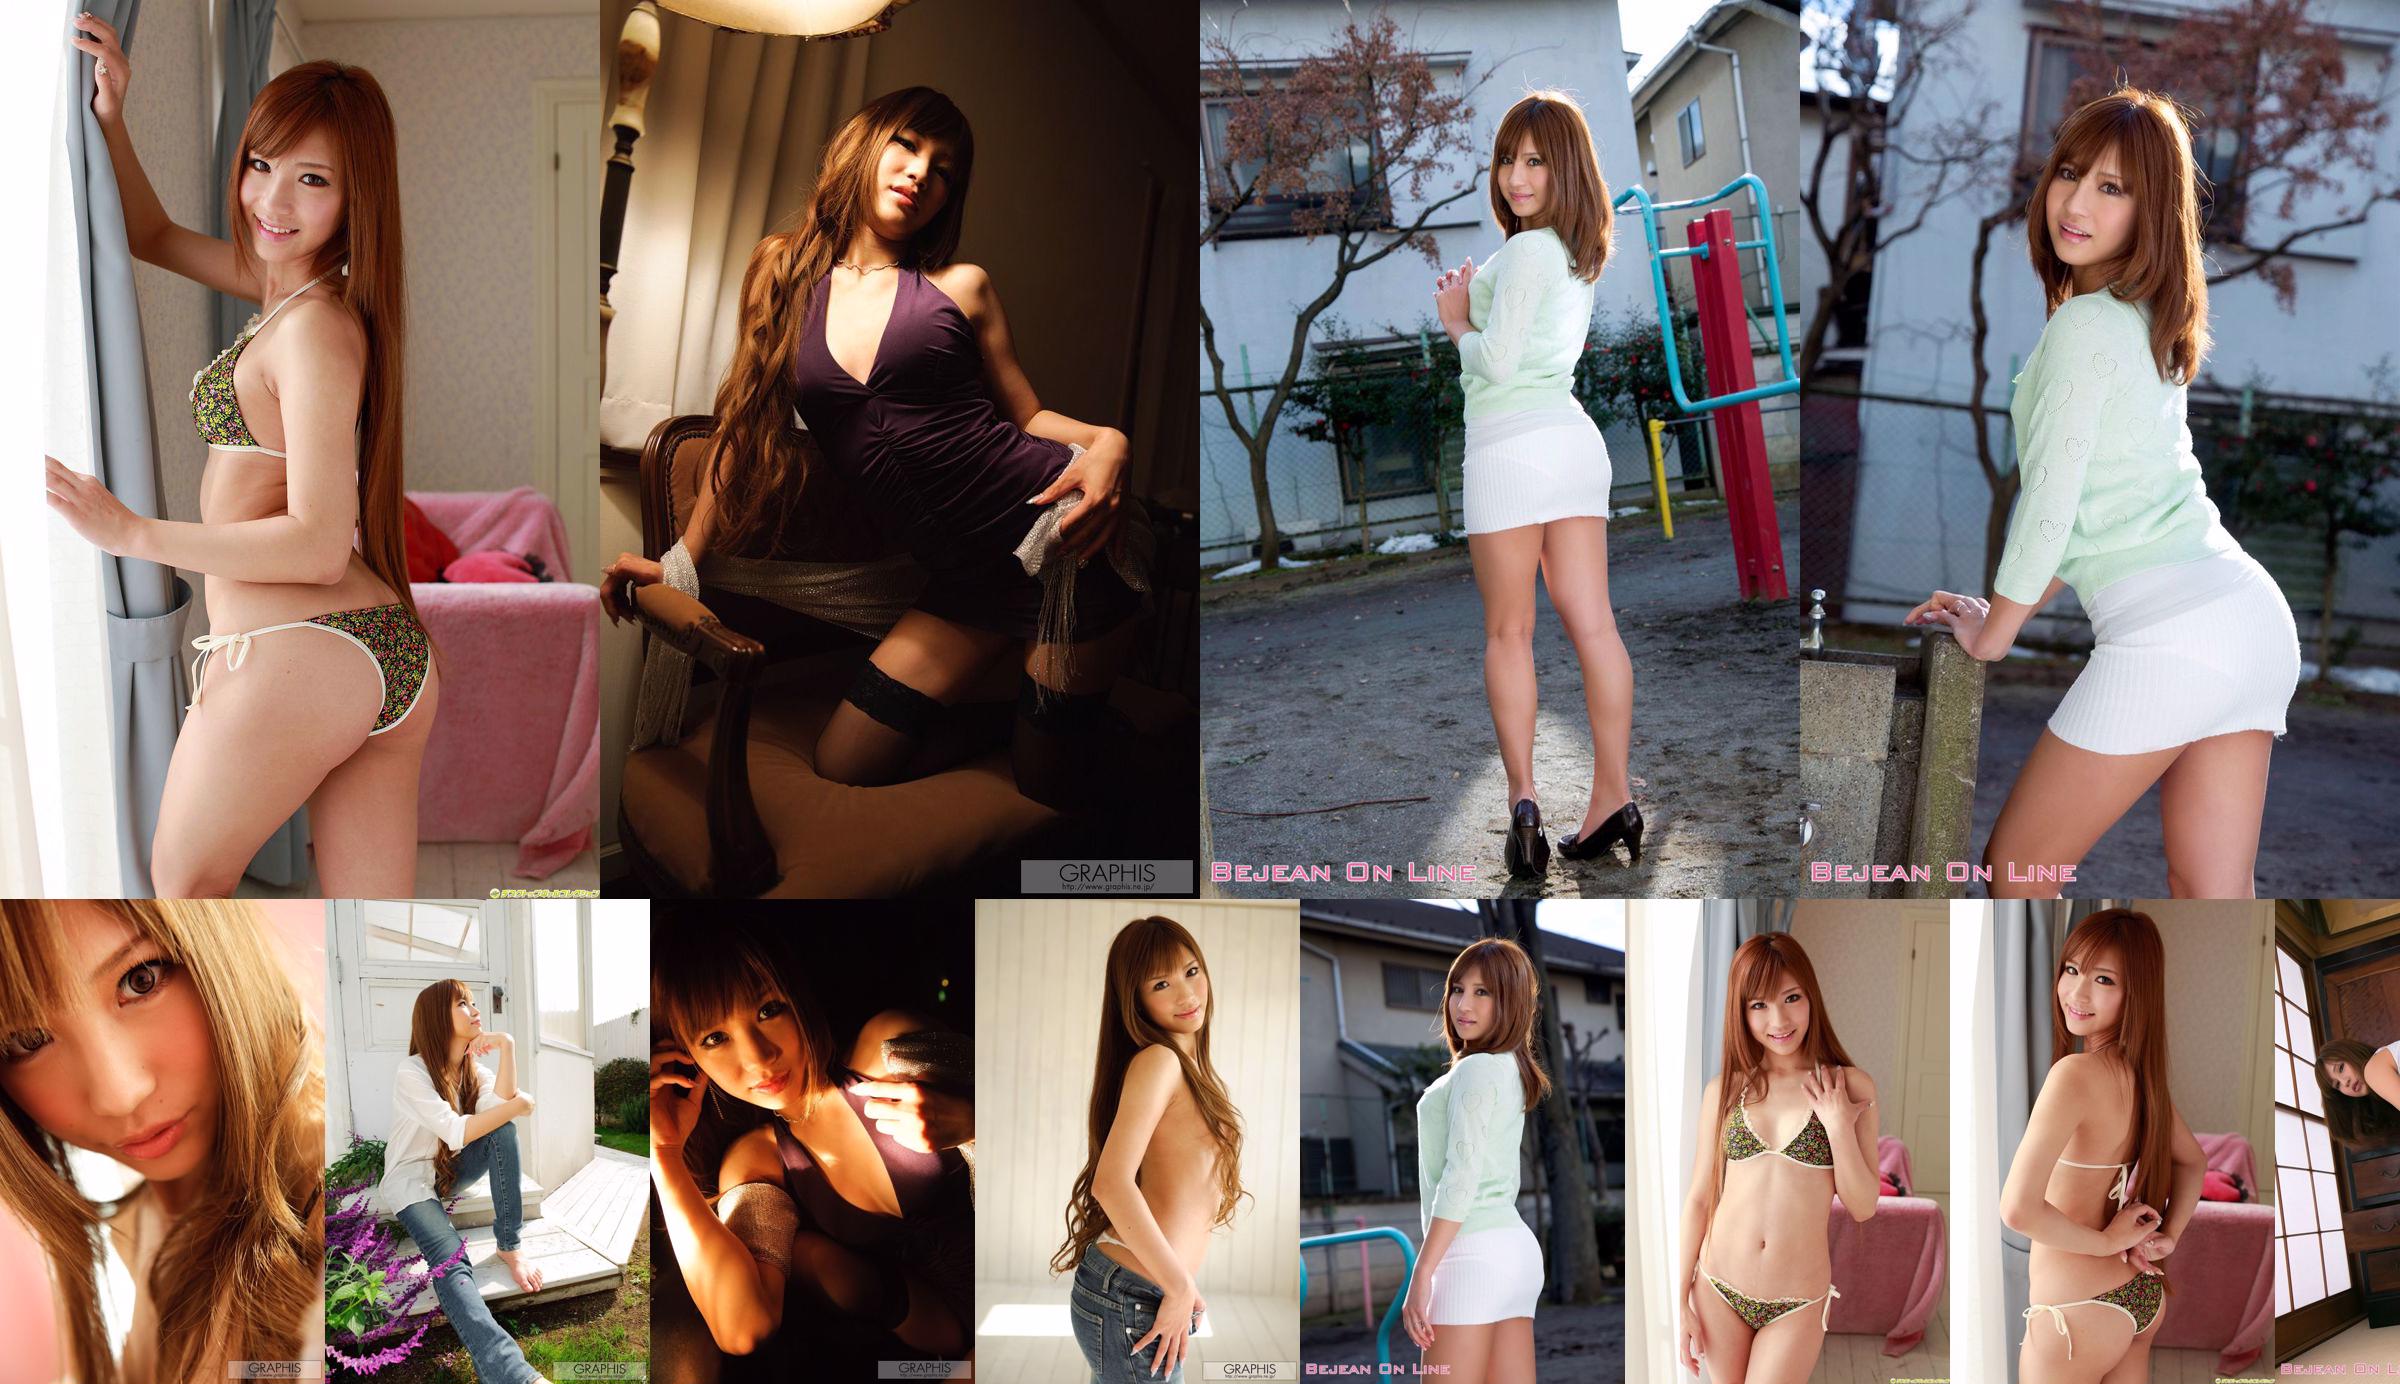 Special Special Gravure Anna Anjou Anna Anjo [Bejean On Line] No.c92177 Pagina 5